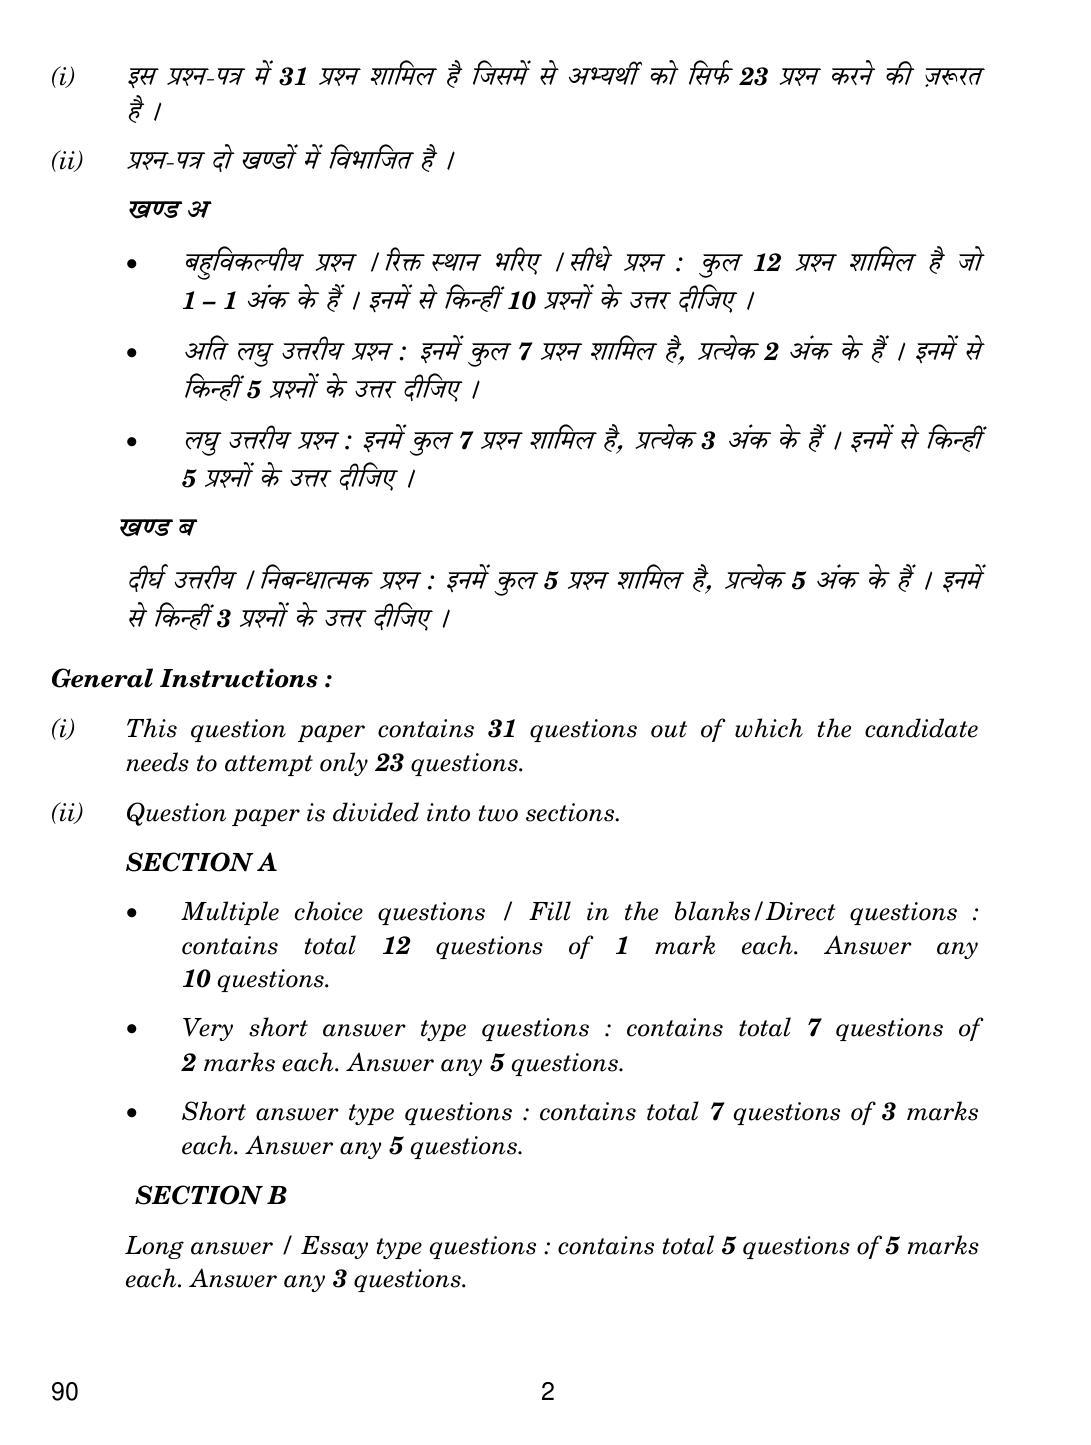 CBSE Class 10 90 SECURITY 2019 Question Paper - Page 2